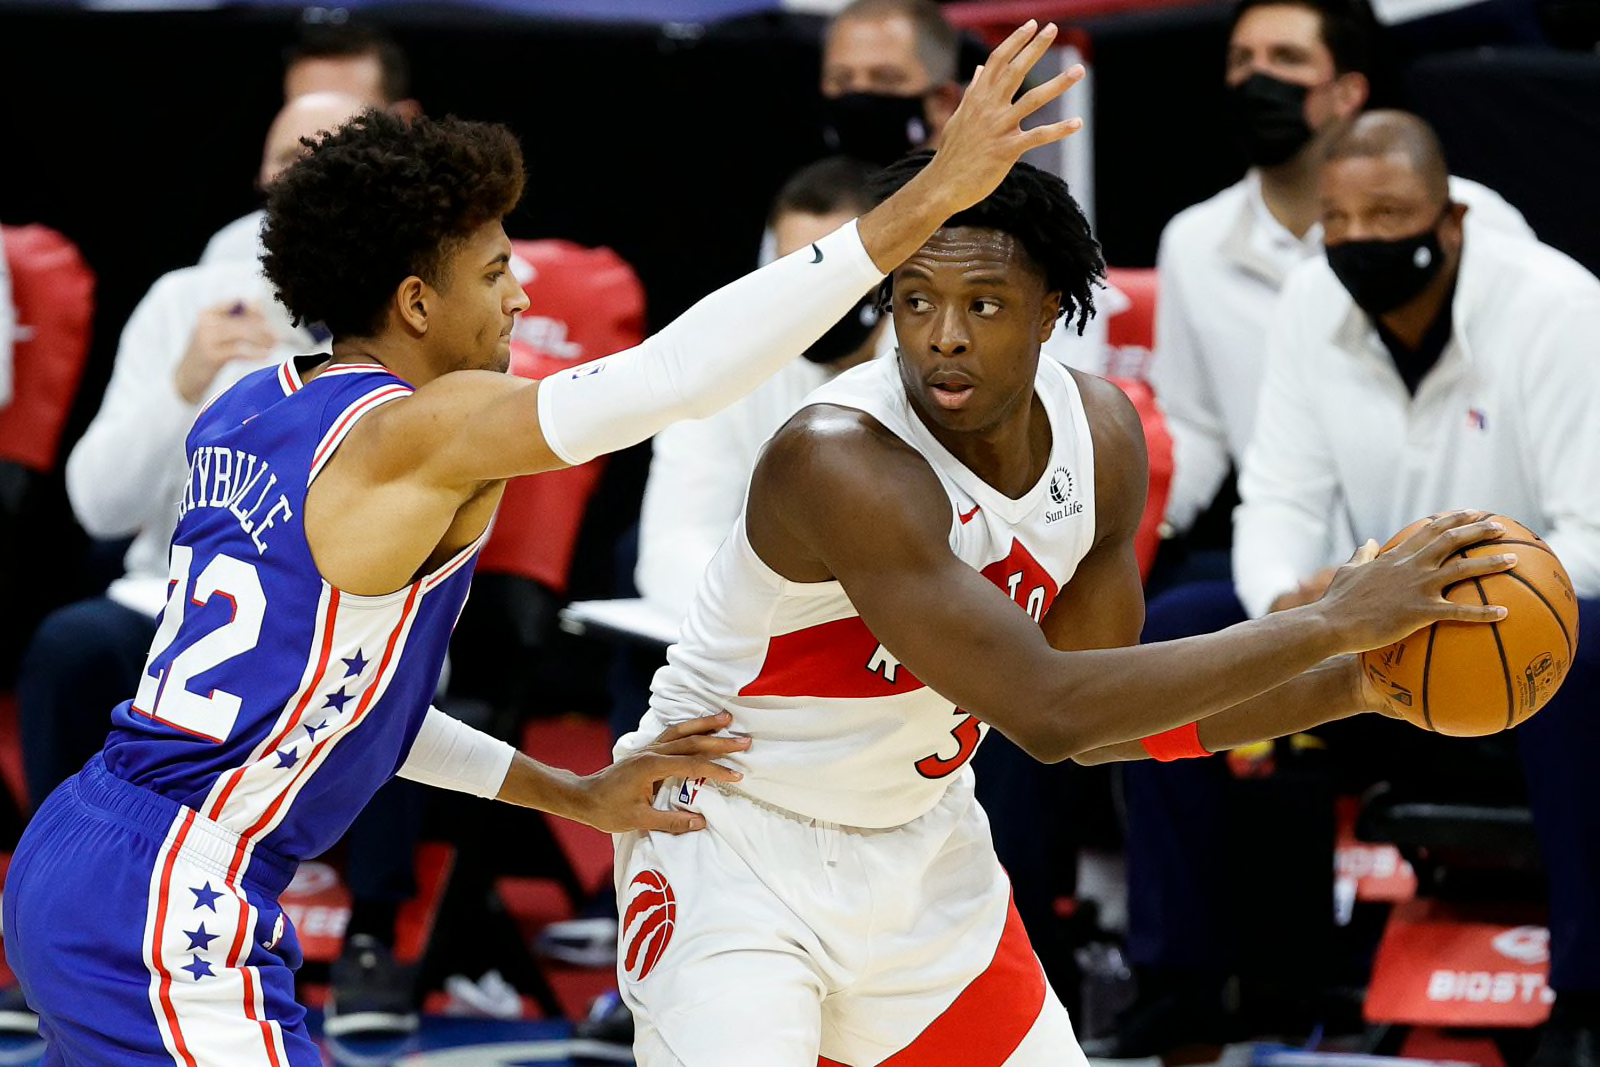 How OG Anunoby went from an undiscovered recruit to a March